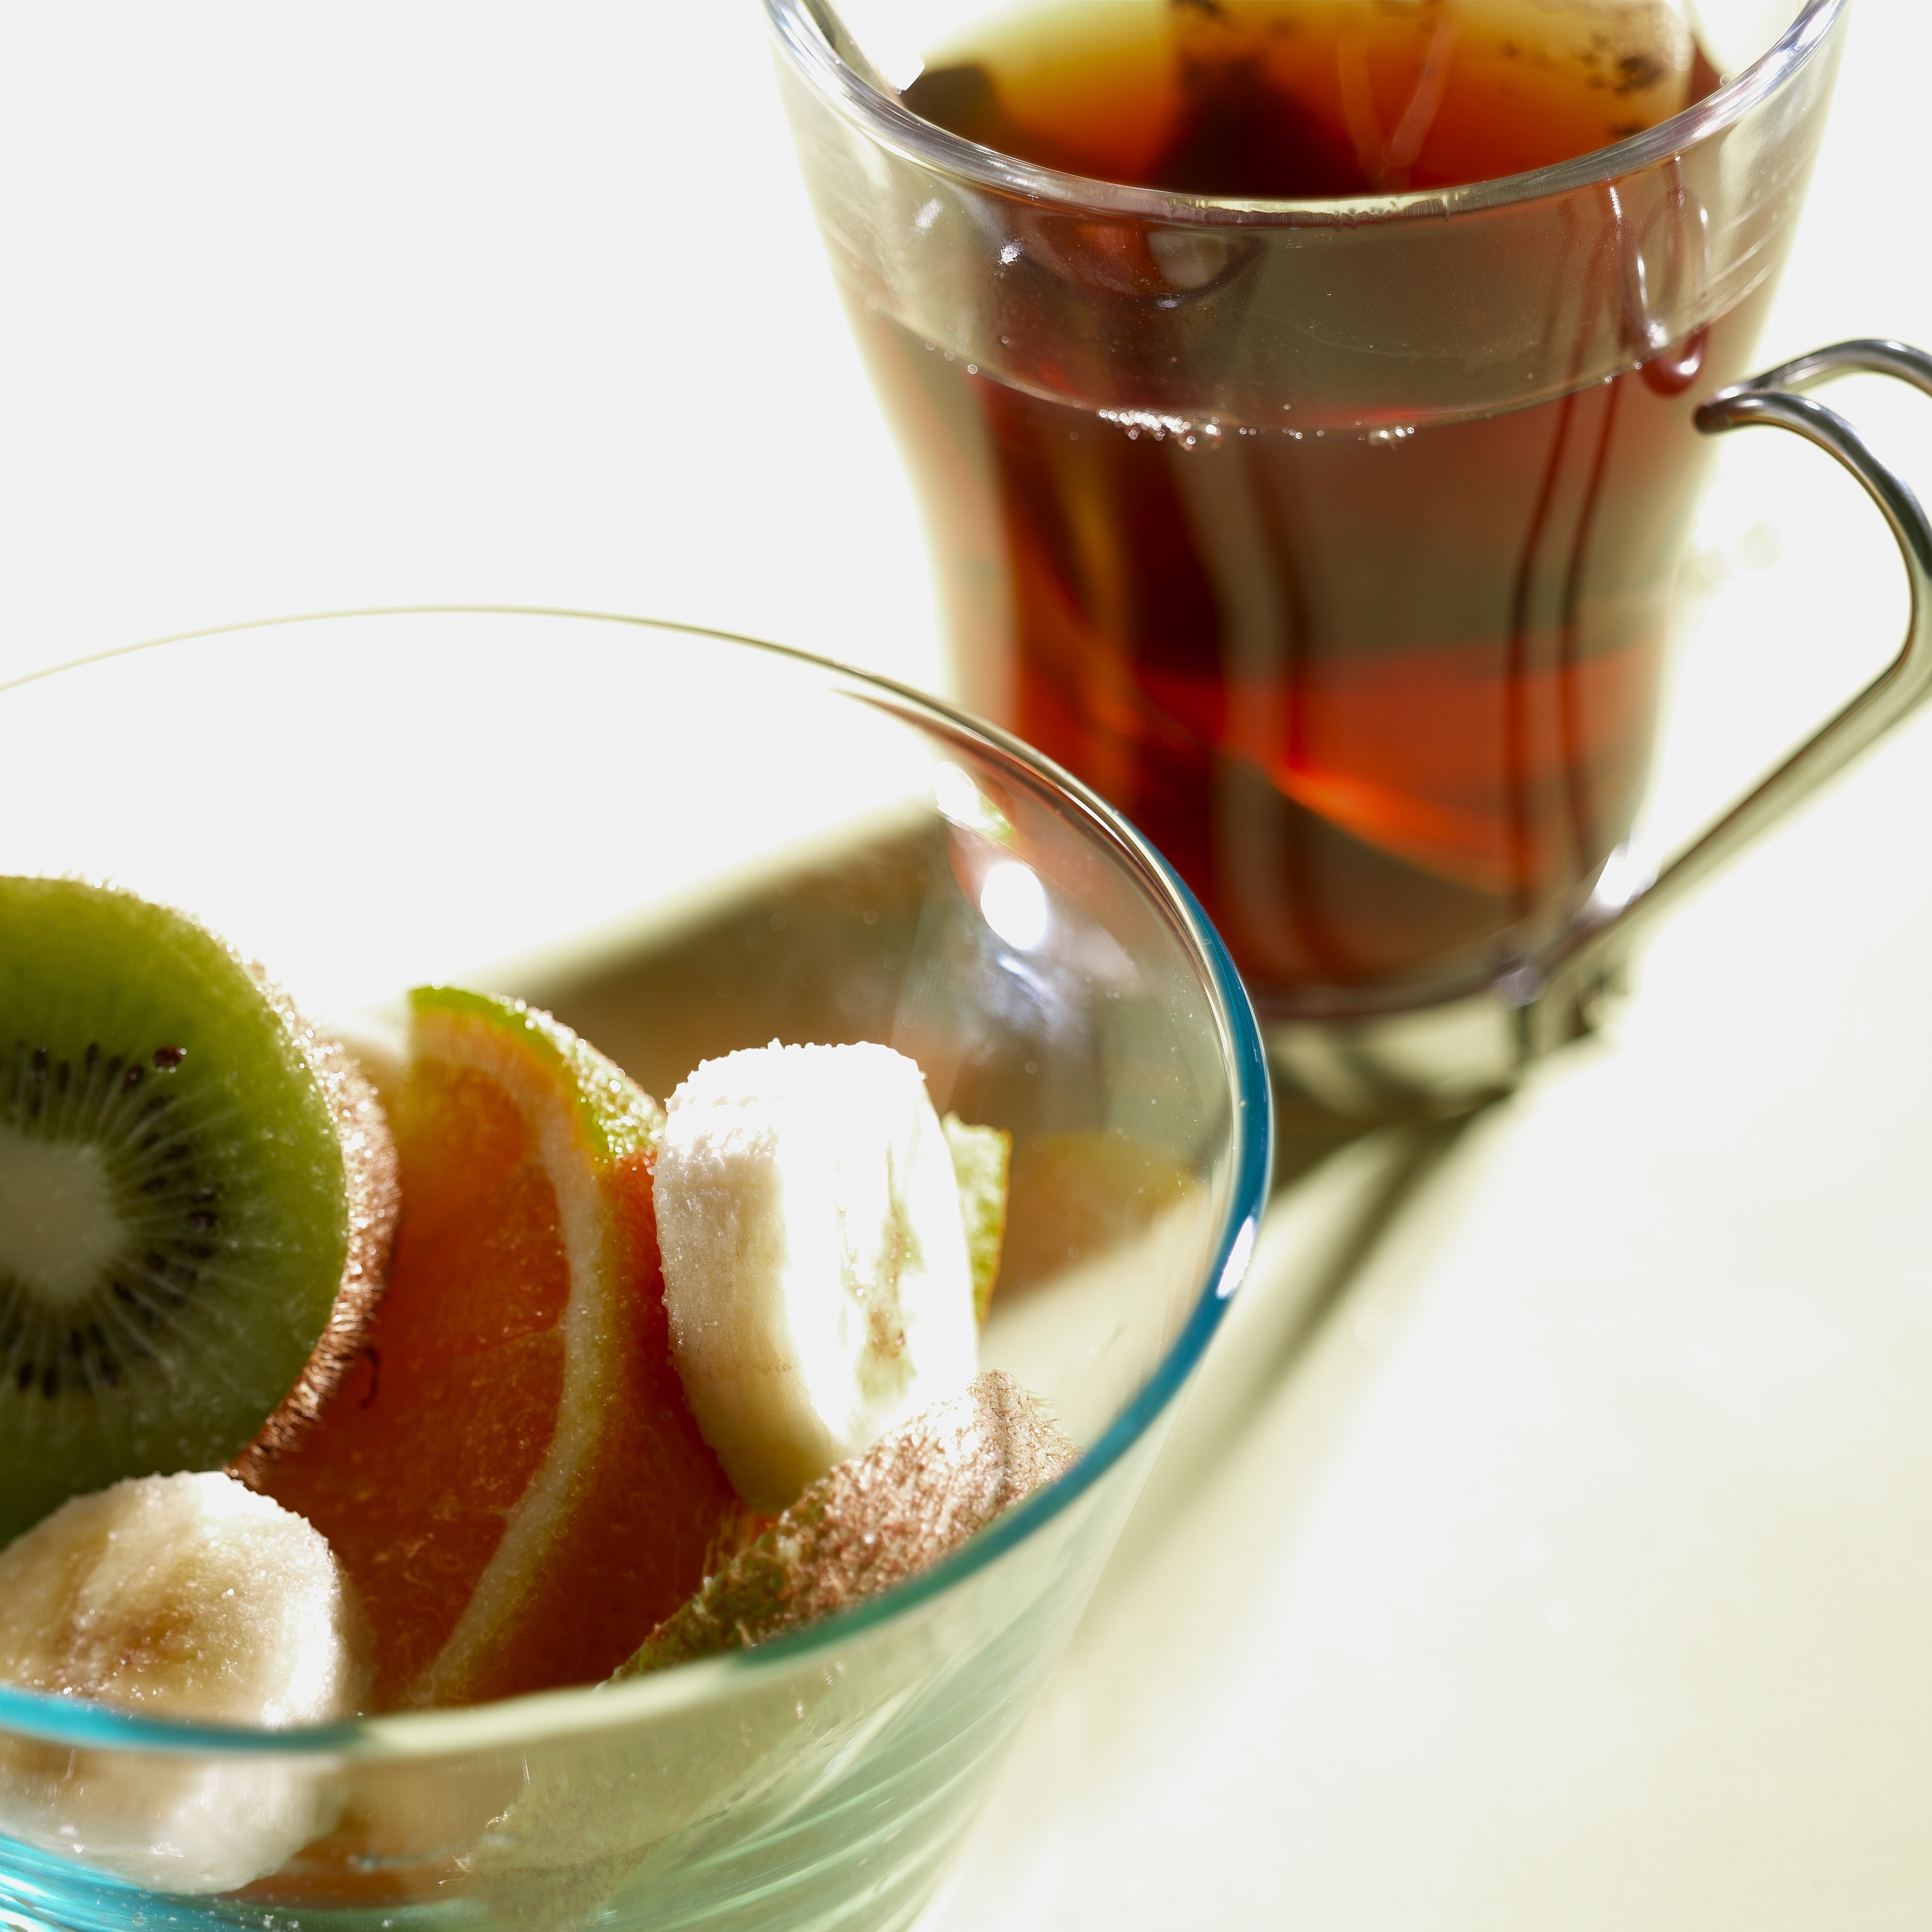 sliced kiwi, orange and bananas in clear drinking glass